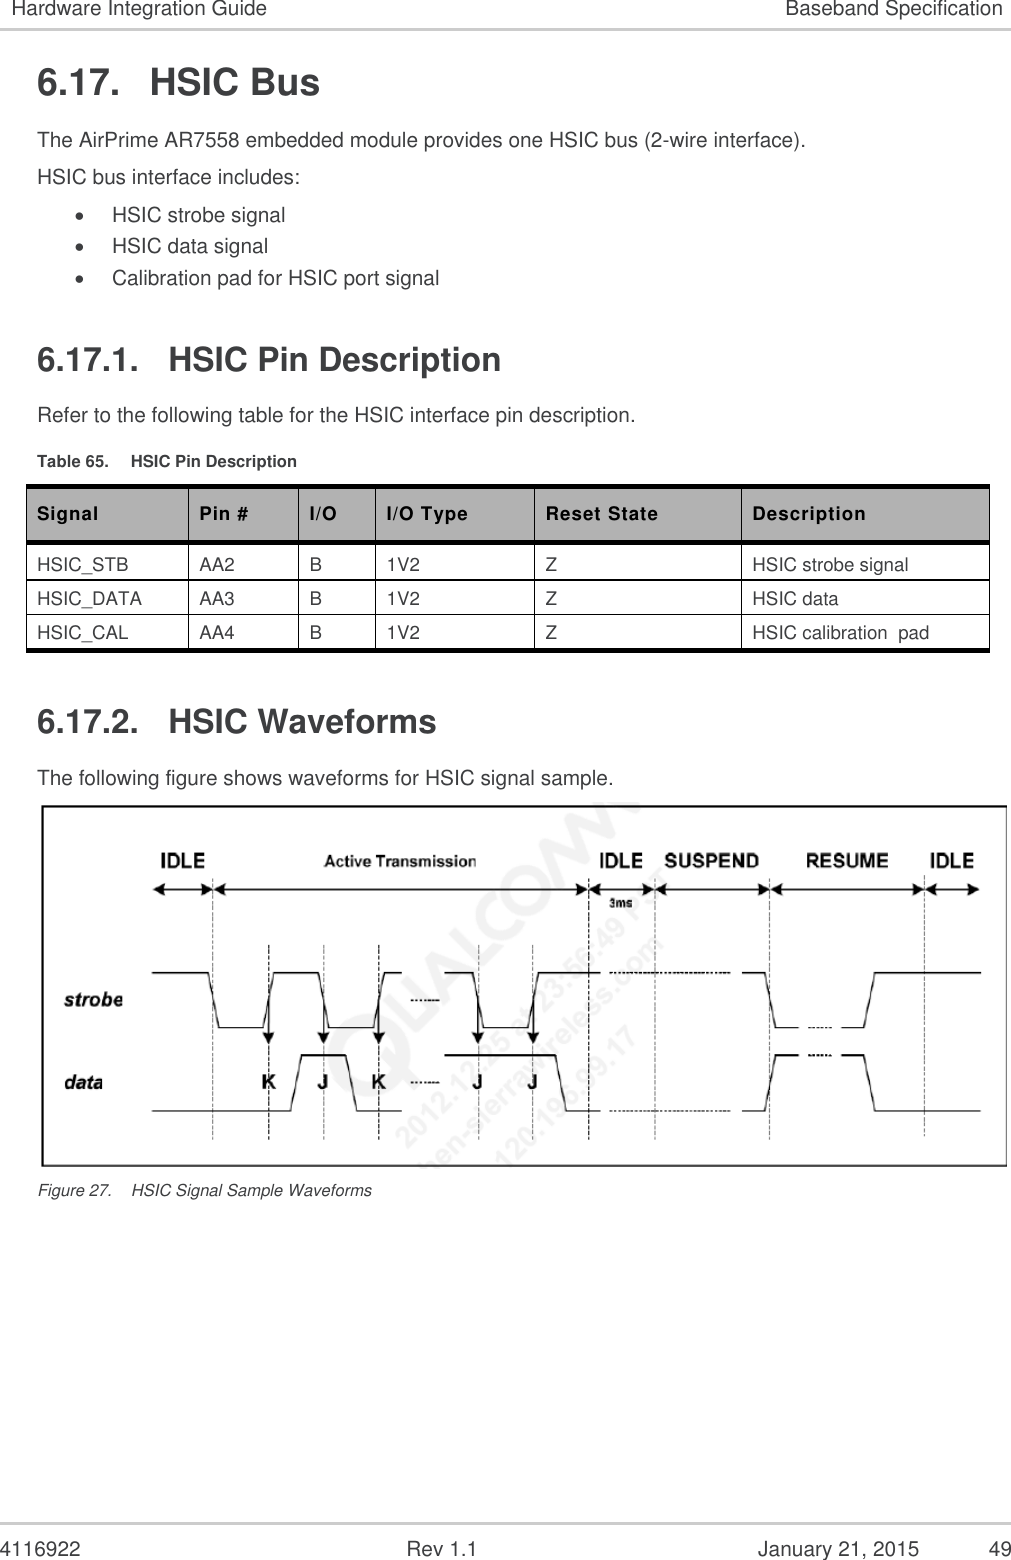   4116922              Rev 1.1          January 21, 2015  49 Hardware Integration Guide Baseband Specification 6.17.  HSIC Bus The AirPrime AR7558 embedded module provides one HSIC bus (2-wire interface). HSIC bus interface includes:  HSIC strobe signal  HSIC data signal  Calibration pad for HSIC port signal 6.17.1.  HSIC Pin Description Refer to the following table for the HSIC interface pin description. Table 65.  HSIC Pin Description Signal Pin # I/O I/O Type Reset State Description HSIC_STB AA2 B 1V2 Z HSIC strobe signal HSIC_DATA AA3 B 1V2 Z HSIC data  HSIC_CAL AA4 B 1V2 Z HSIC calibration  pad 6.17.2.  HSIC Waveforms The following figure shows waveforms for HSIC signal sample.  Figure 27.  HSIC Signal Sample Waveforms   